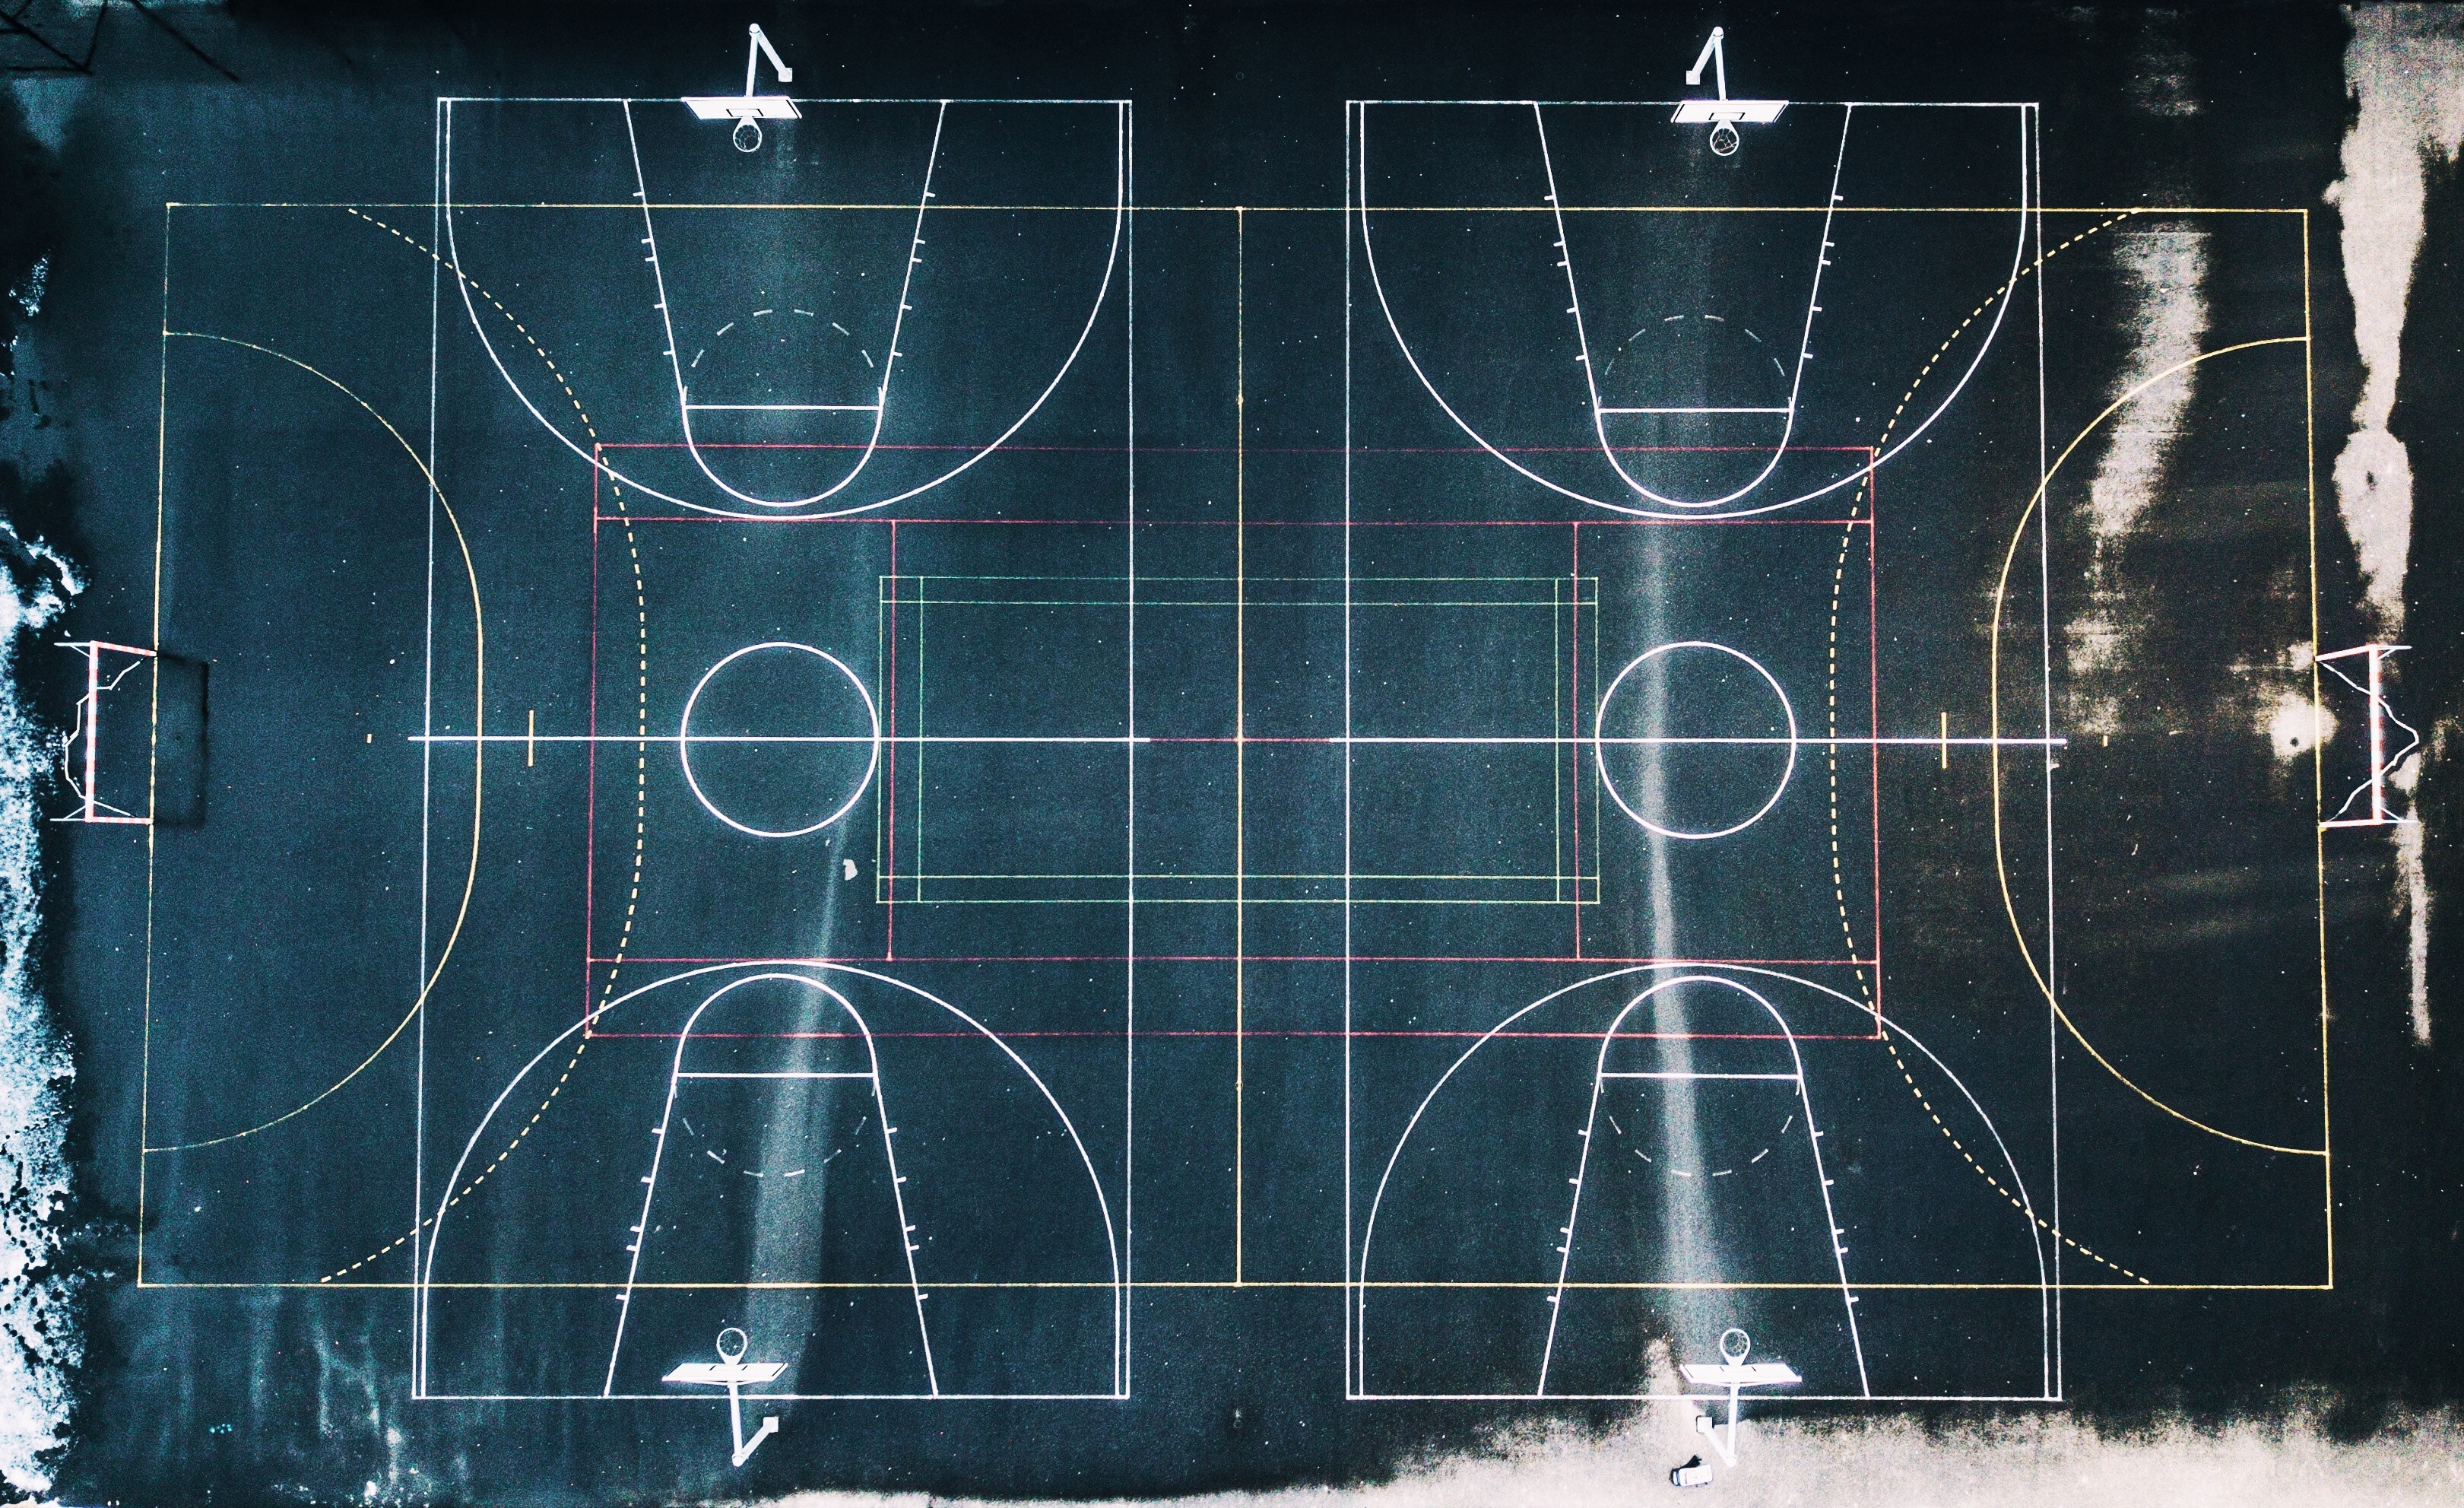 Download "Basketball Court" wallpapers